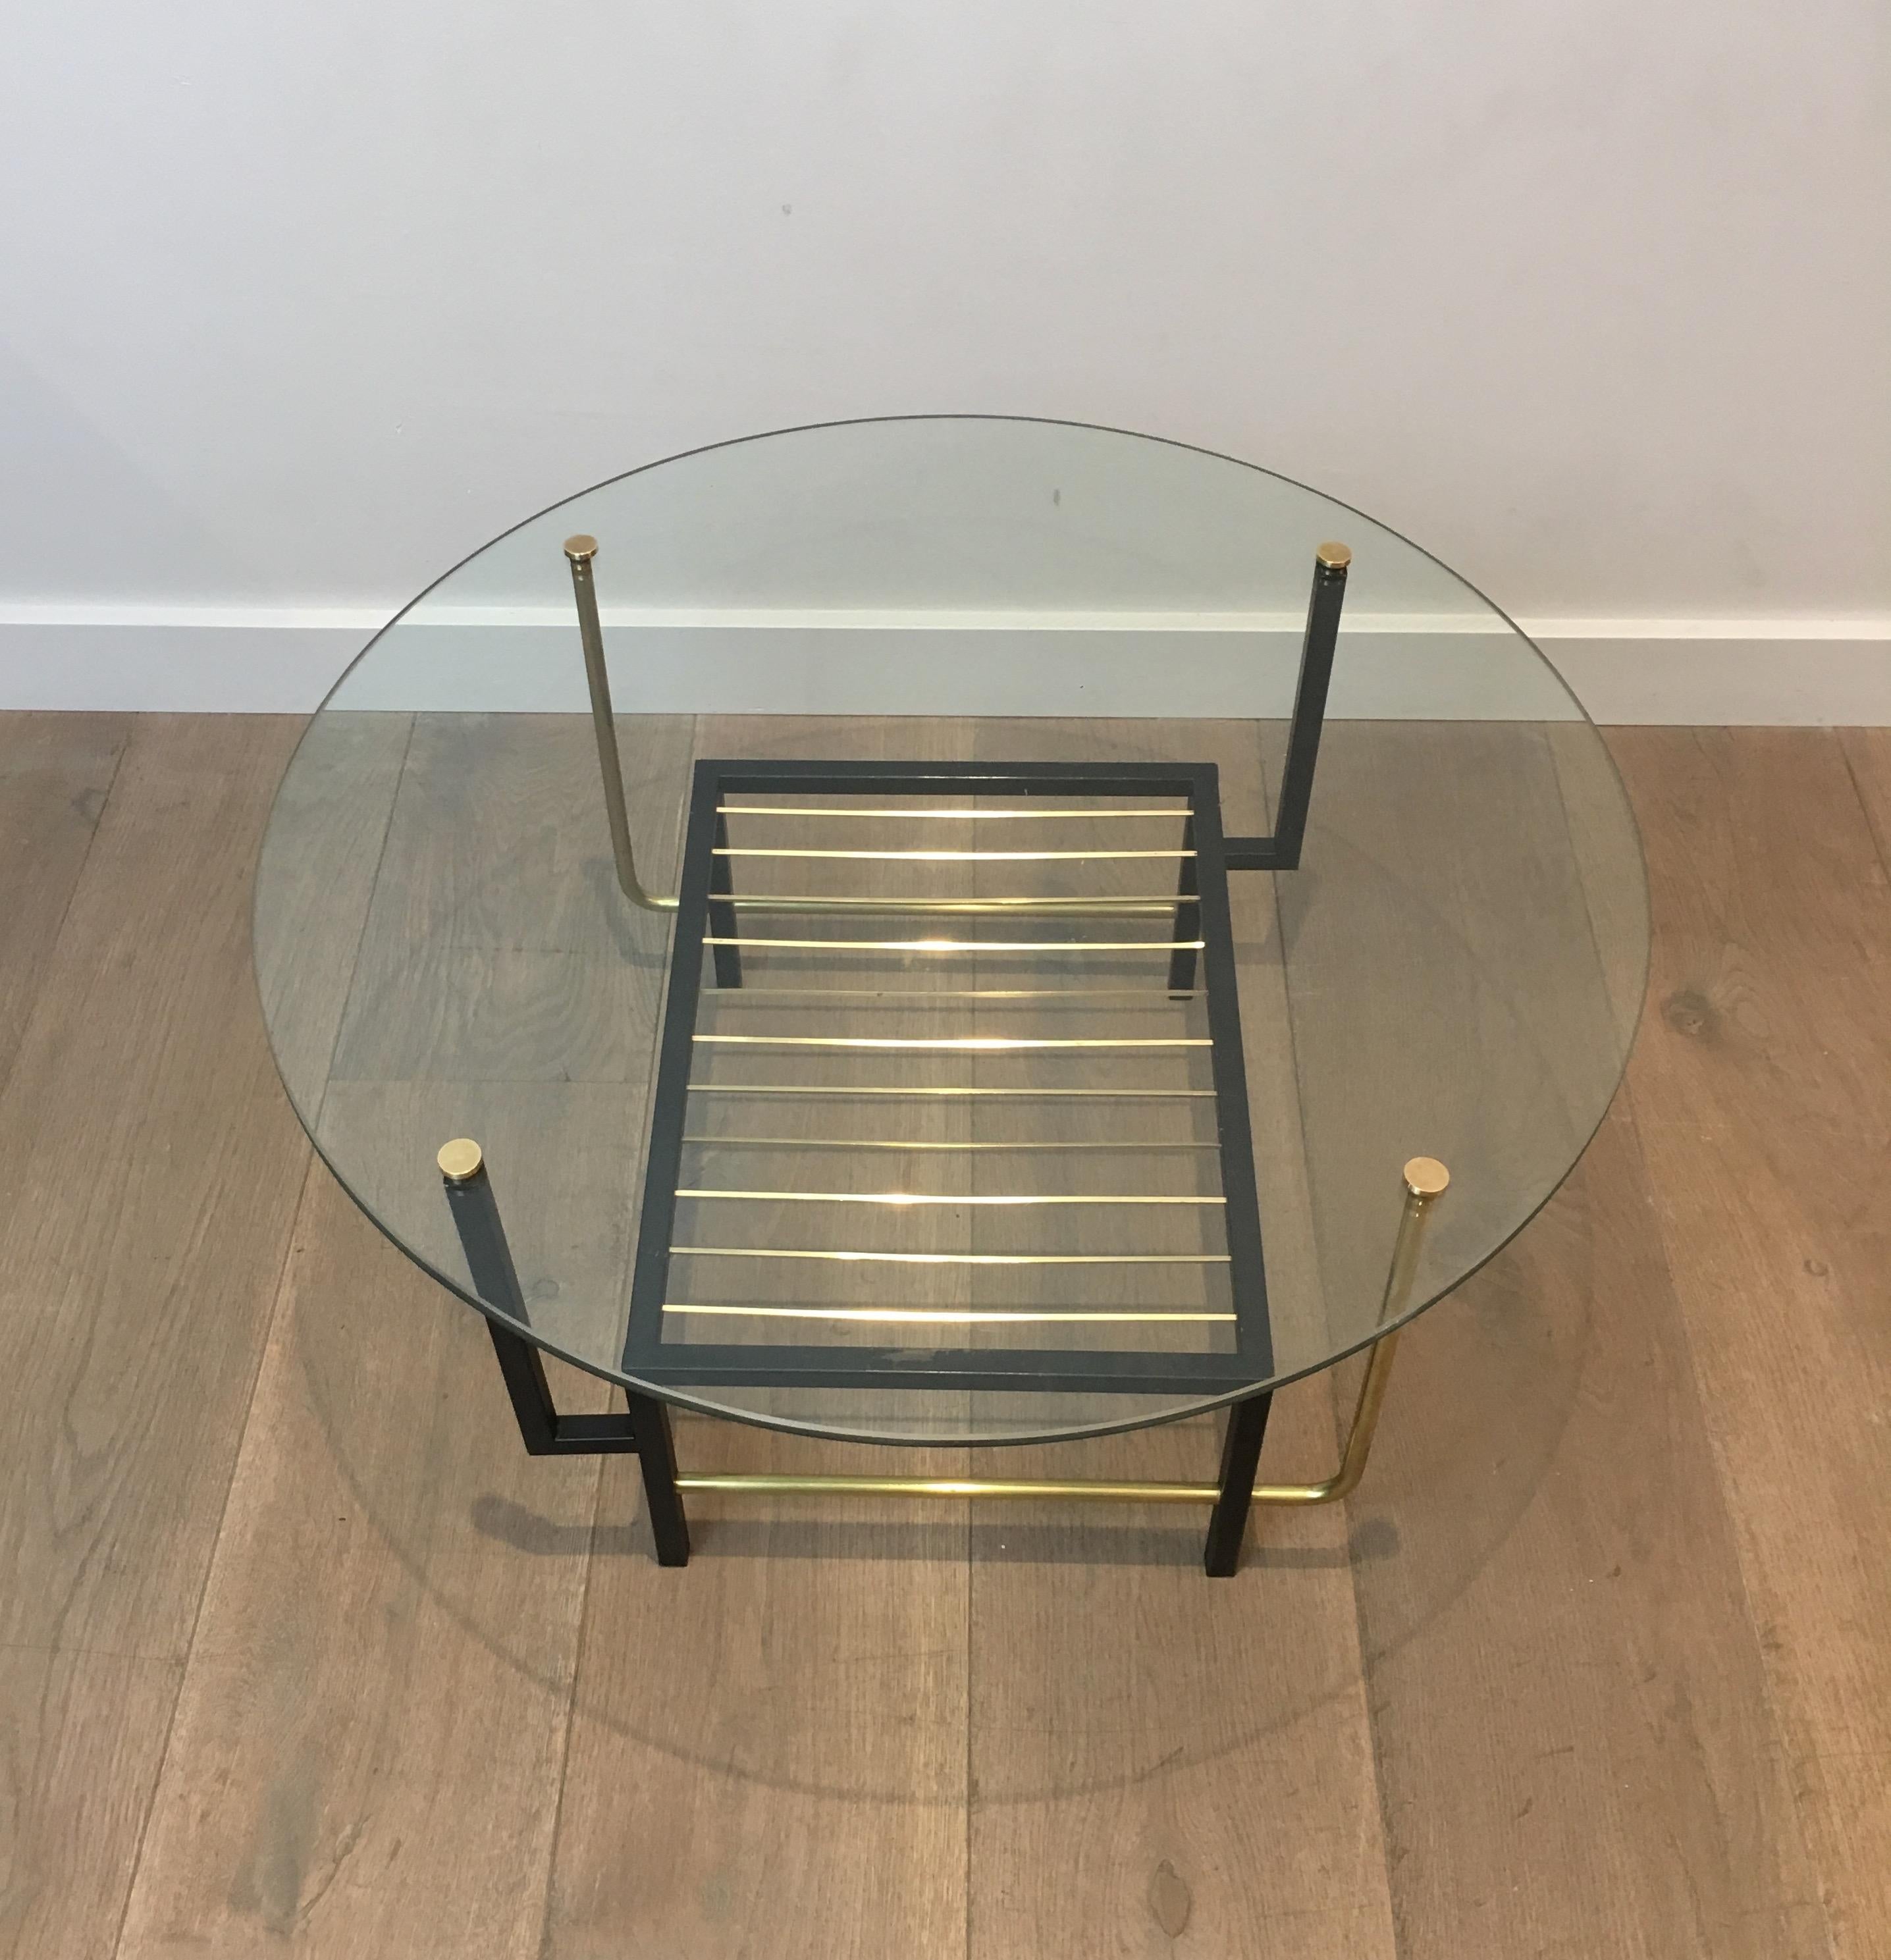 This beautiful coffee table is made of black lacquered and brass with a glass shelf on top. This very nice cocktail table is Attributed to famous French designer Mathieu Matégot, circa 1950.